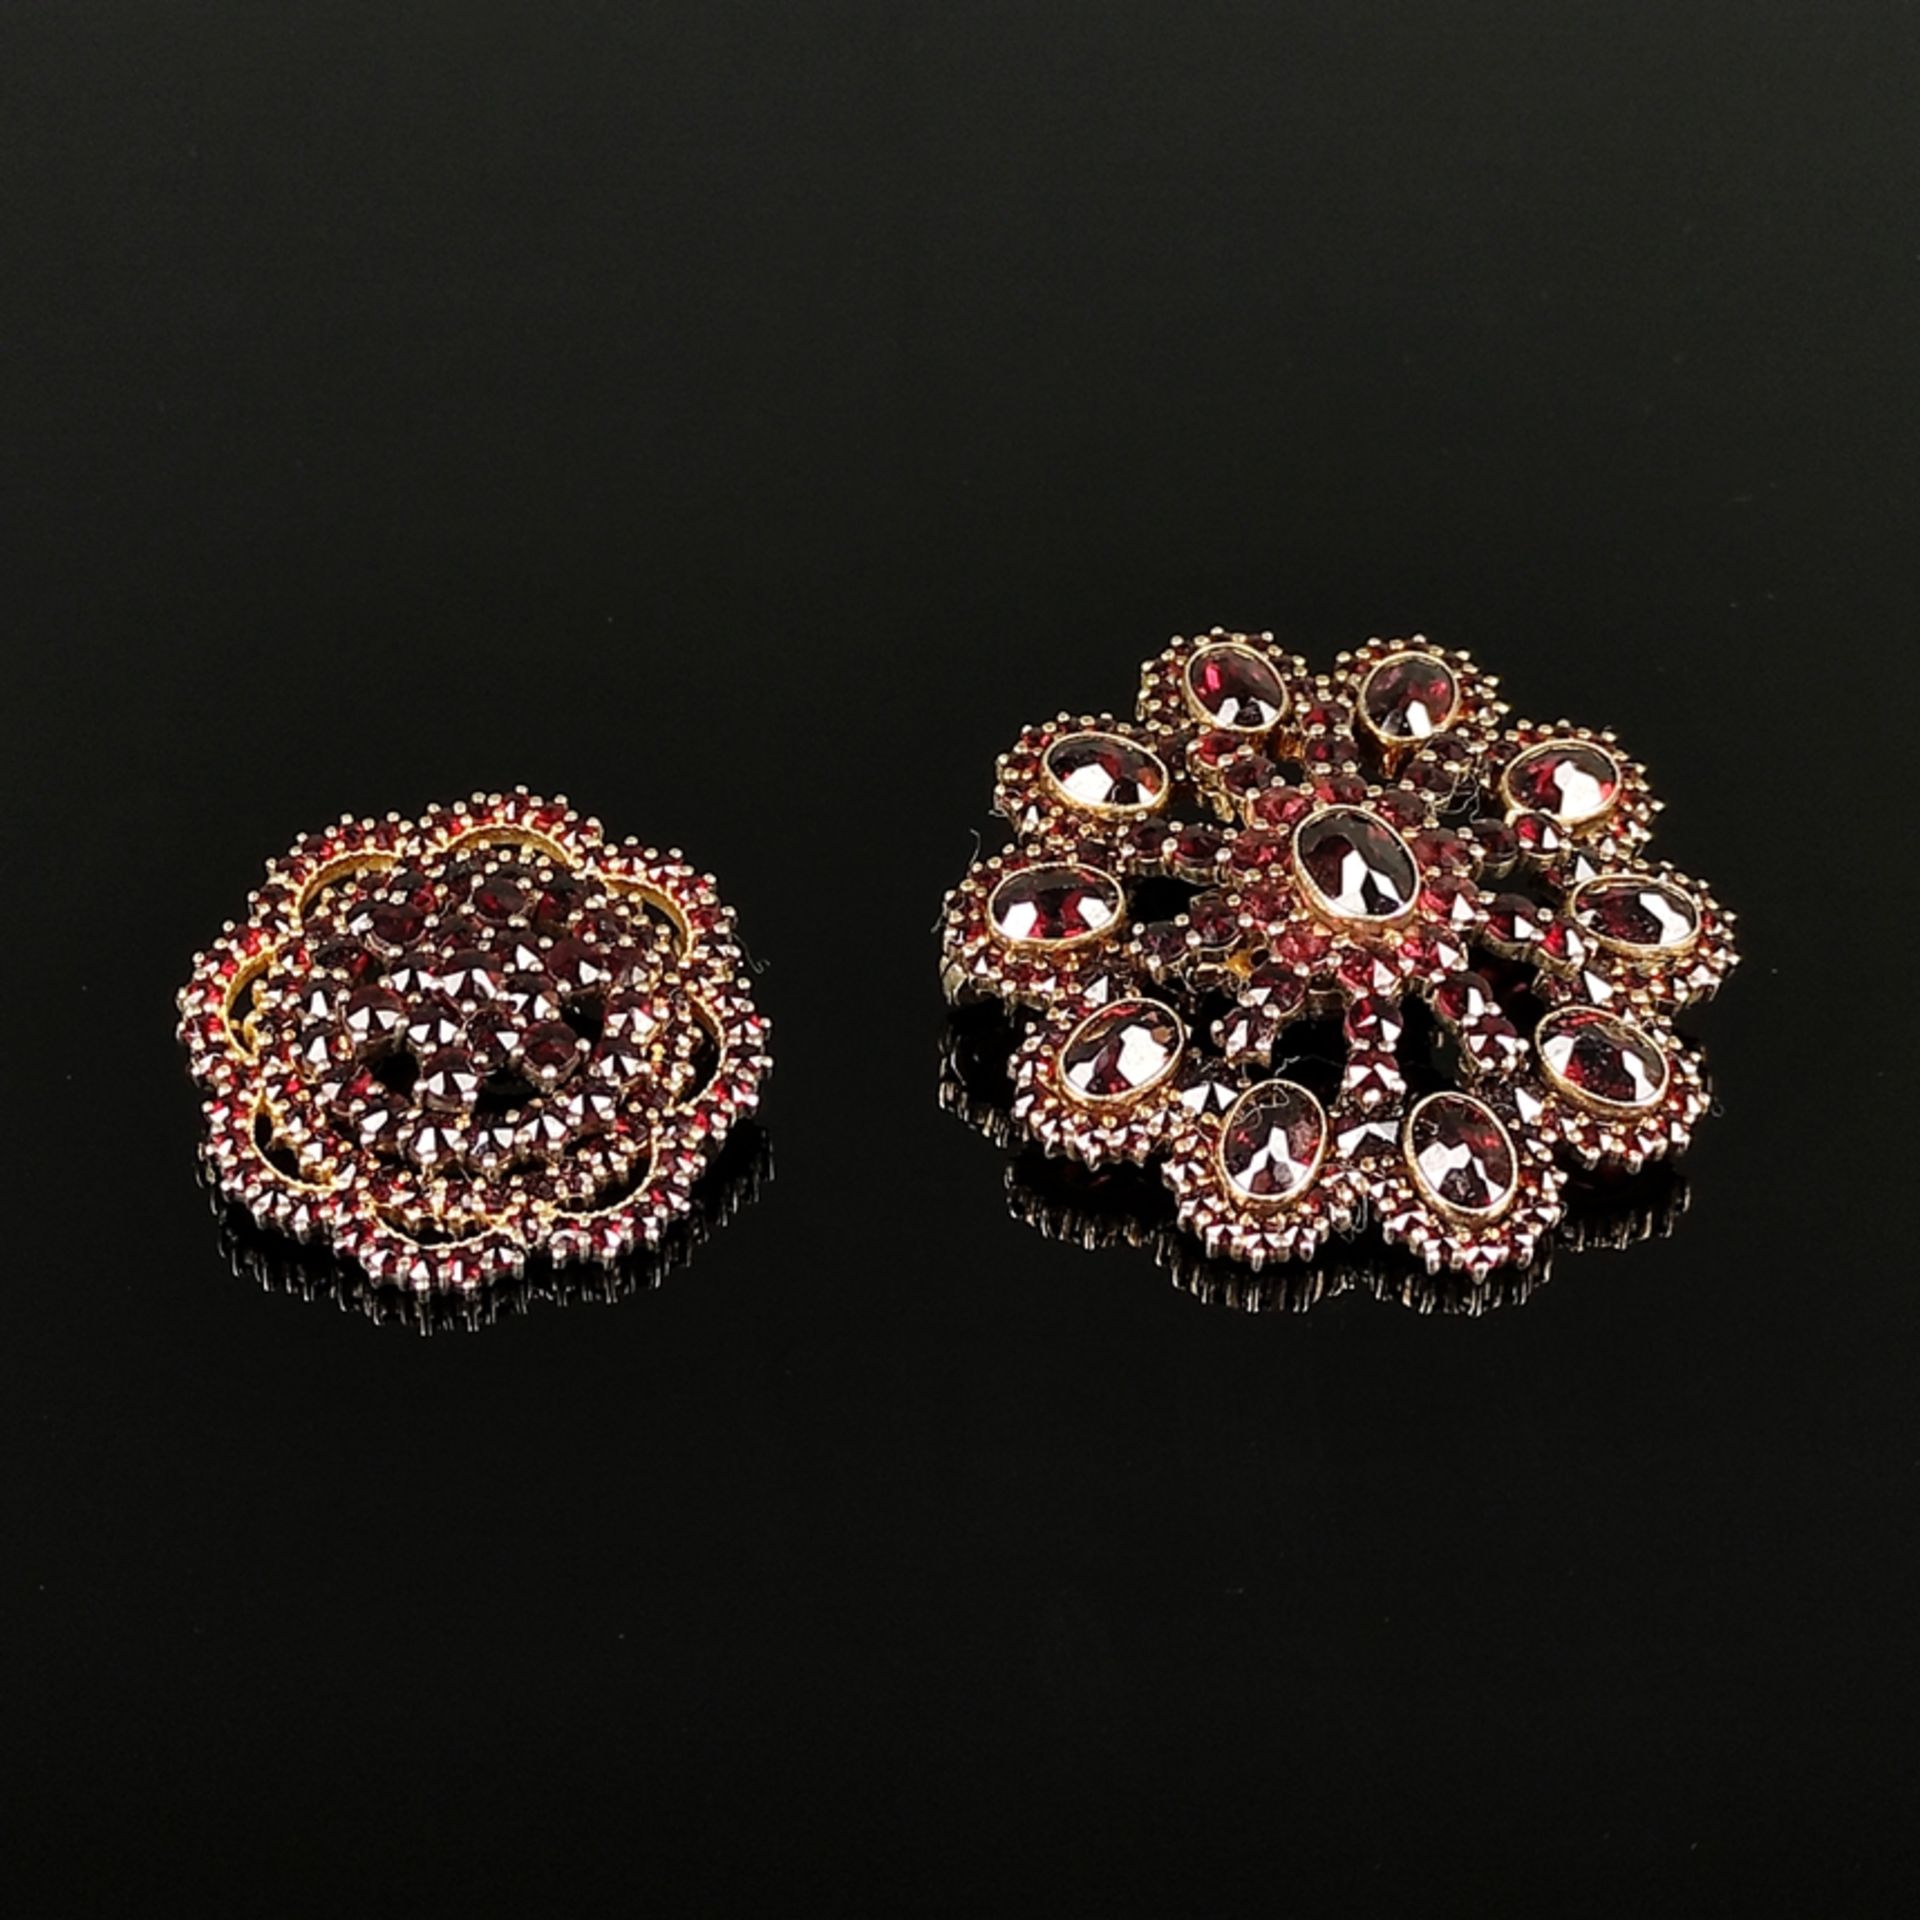 Lot of antique garnet jewellery, 4 pieces, silver 900 gilt (all hallmarked), total weight 52,7g, co - Image 4 of 6